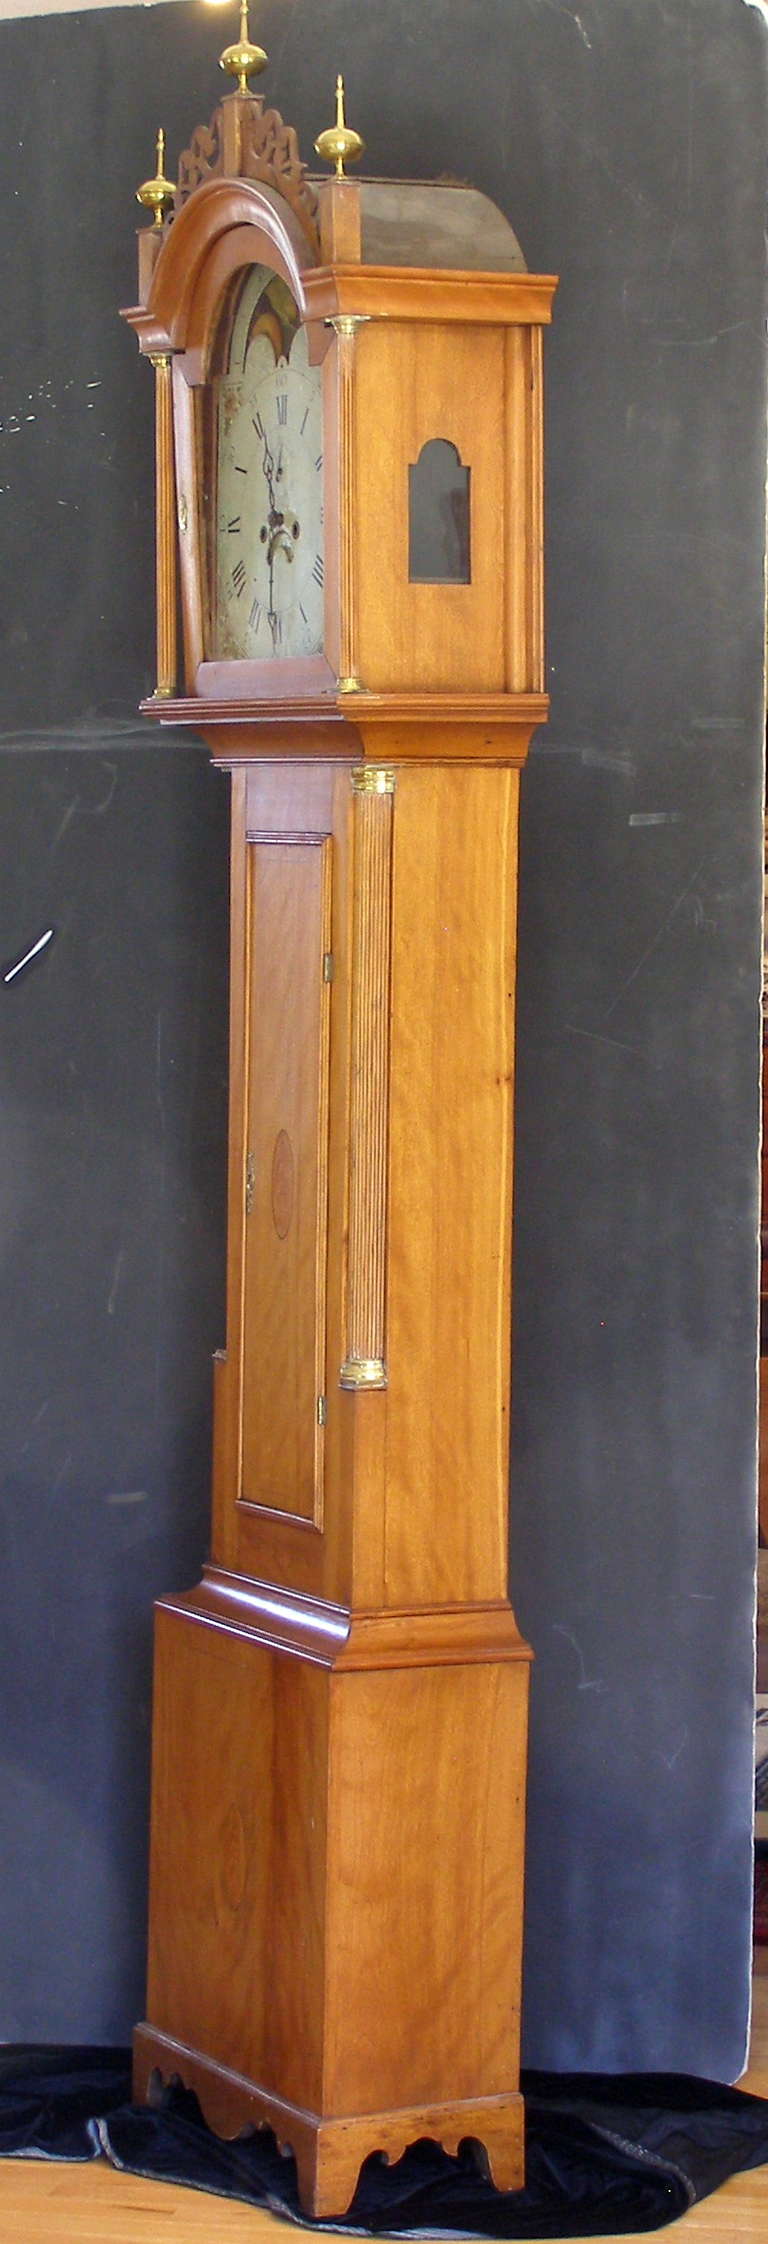 A very attractive light amber inlaid wavy birch New England tall clock probably made in the Concord New Hampshire region. The movement is an eight day time and strike (on the hour) with moon phases dial and date of the month window. The back of the